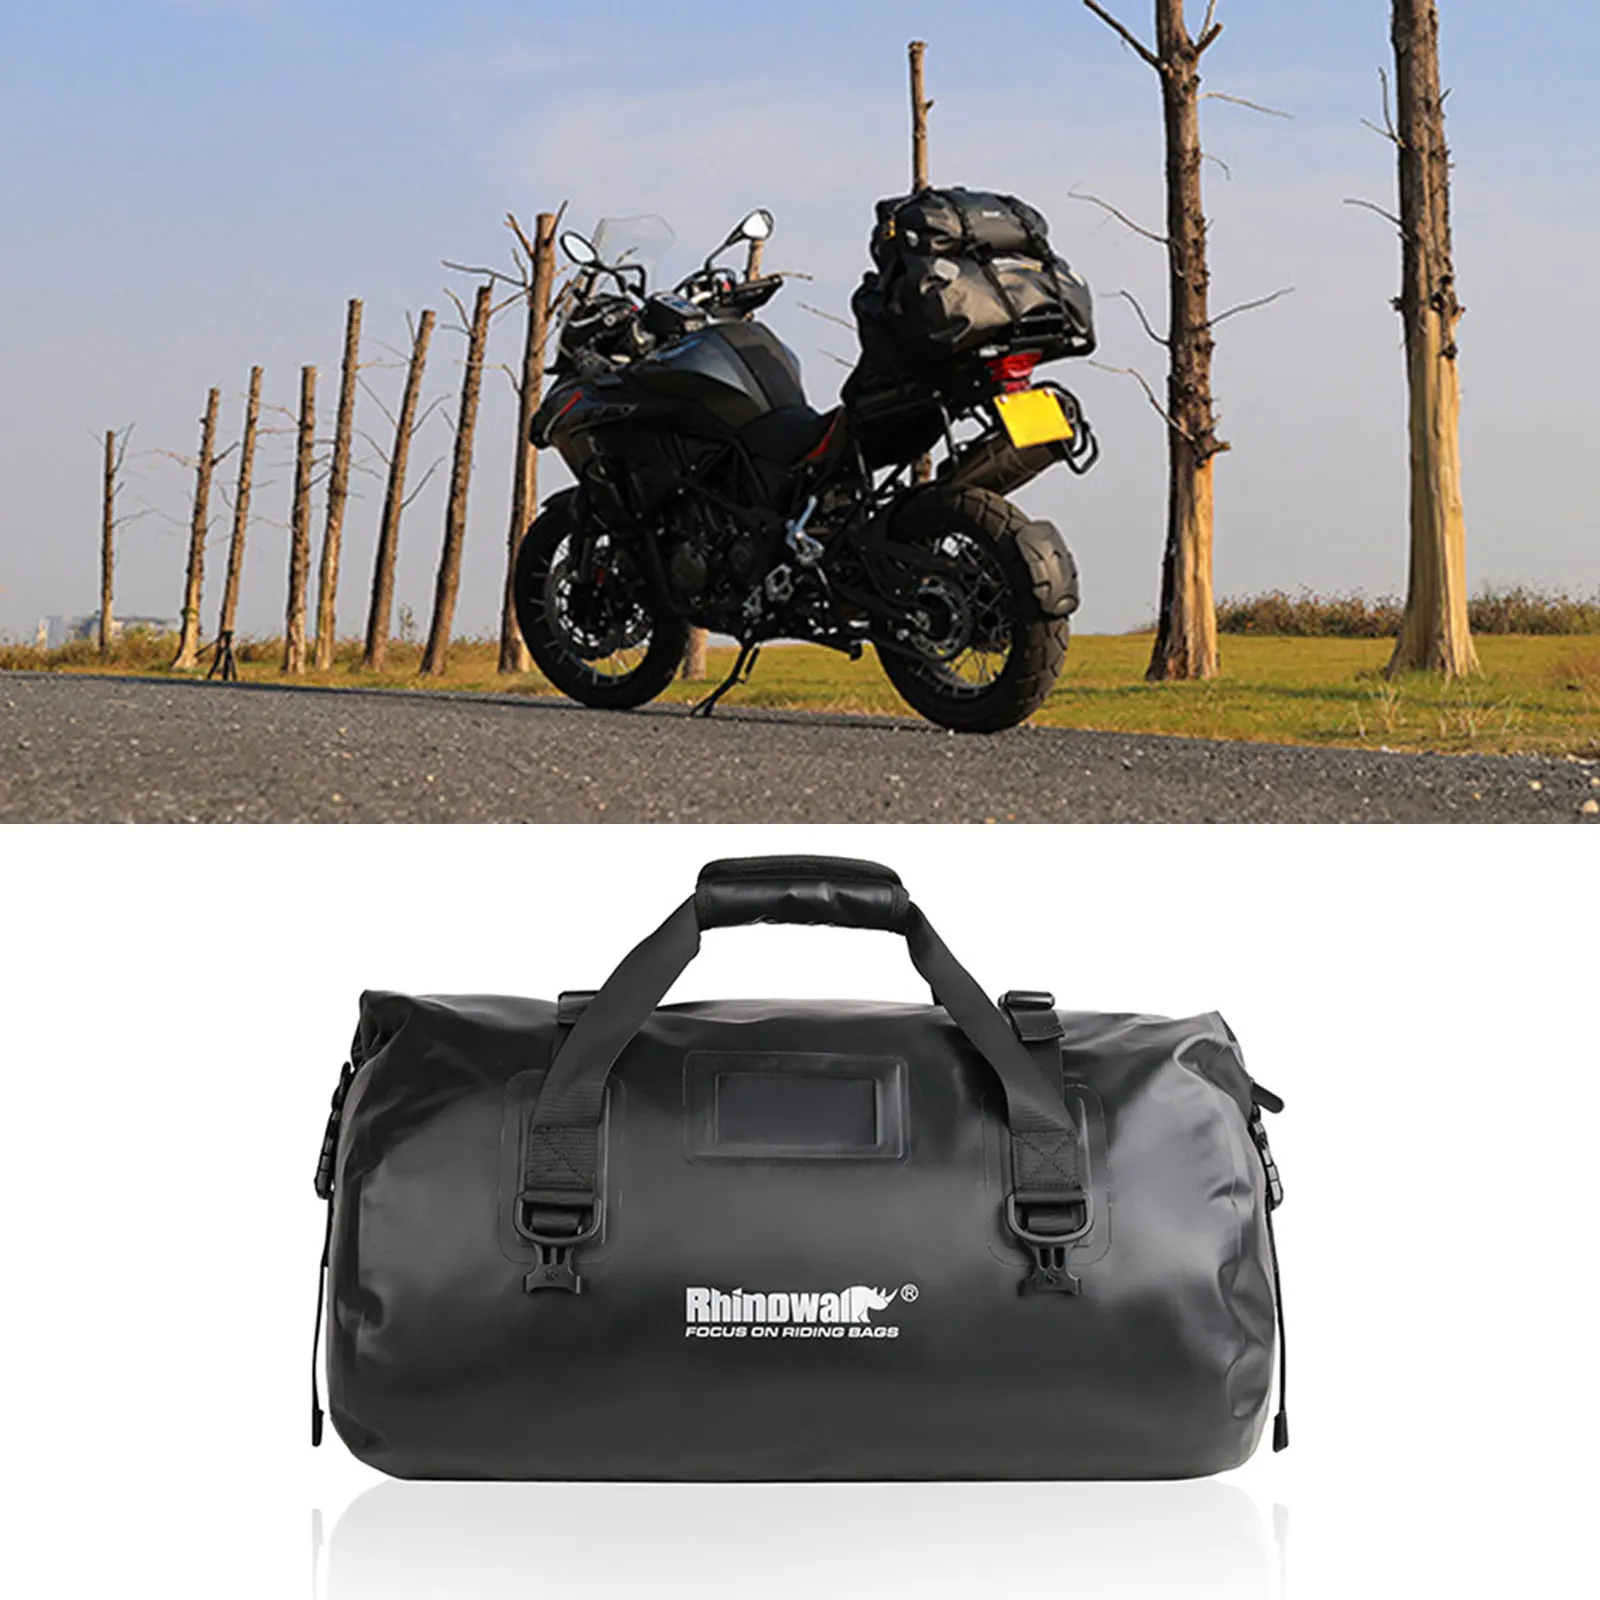 Motorcycle Bag 45L Waterproof PVC Tail Saddle Bag Durable Dry Luggage Outdoor Bag Motorcycle Seat Bag Accessories